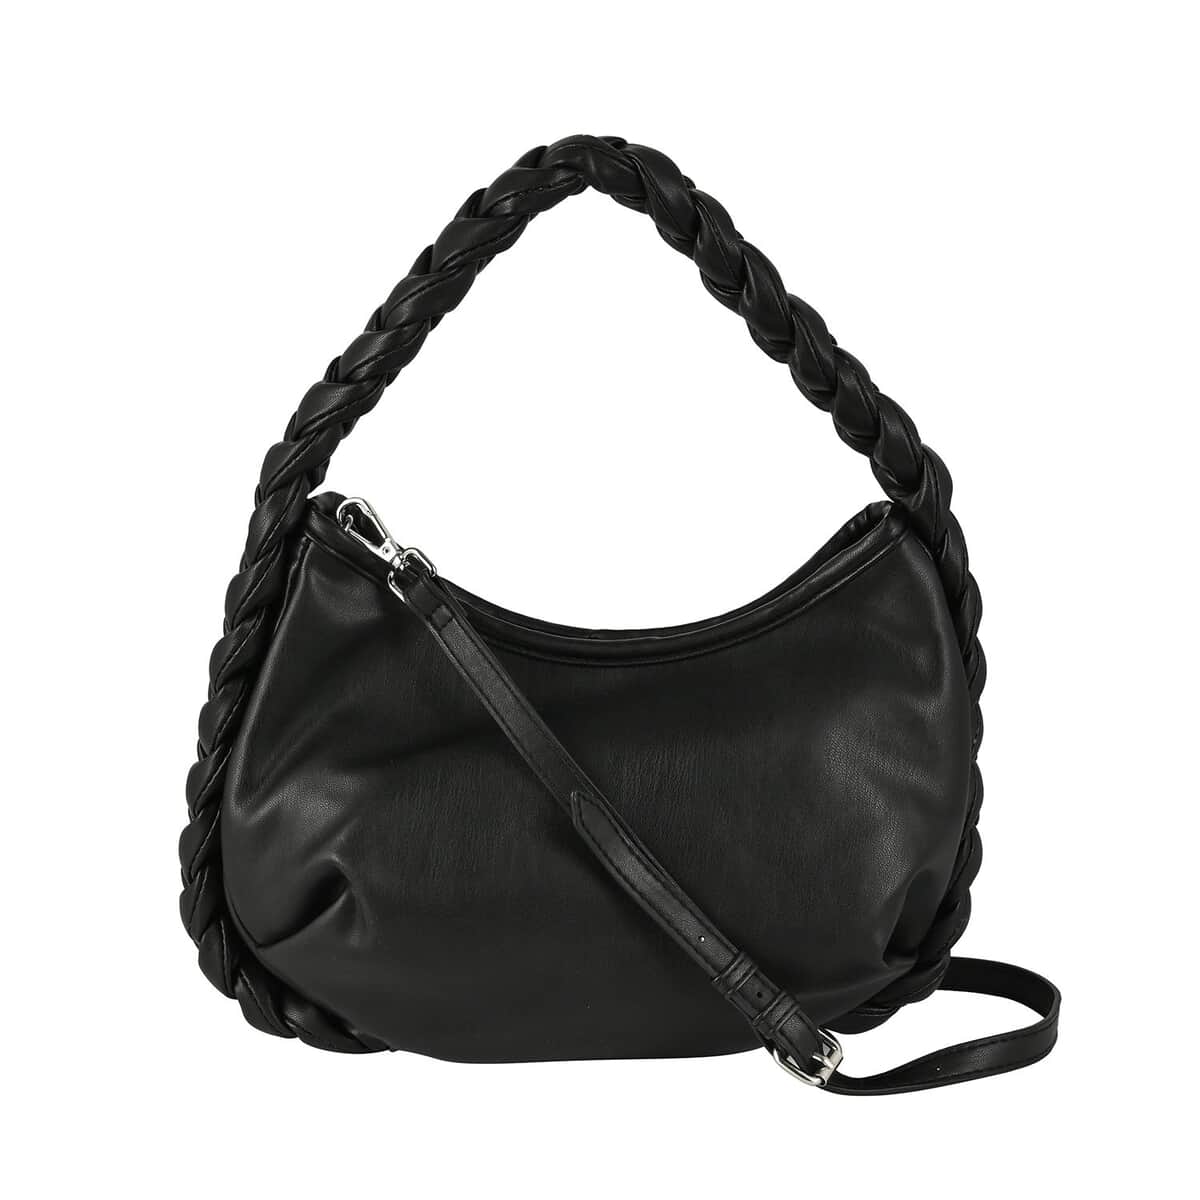 Designer Closeout Collection 18 Black Braided Handle Vegan Leather Hobo Bag (10x7.5x2.3”) with Adjustable Long Strap (51”) image number 0